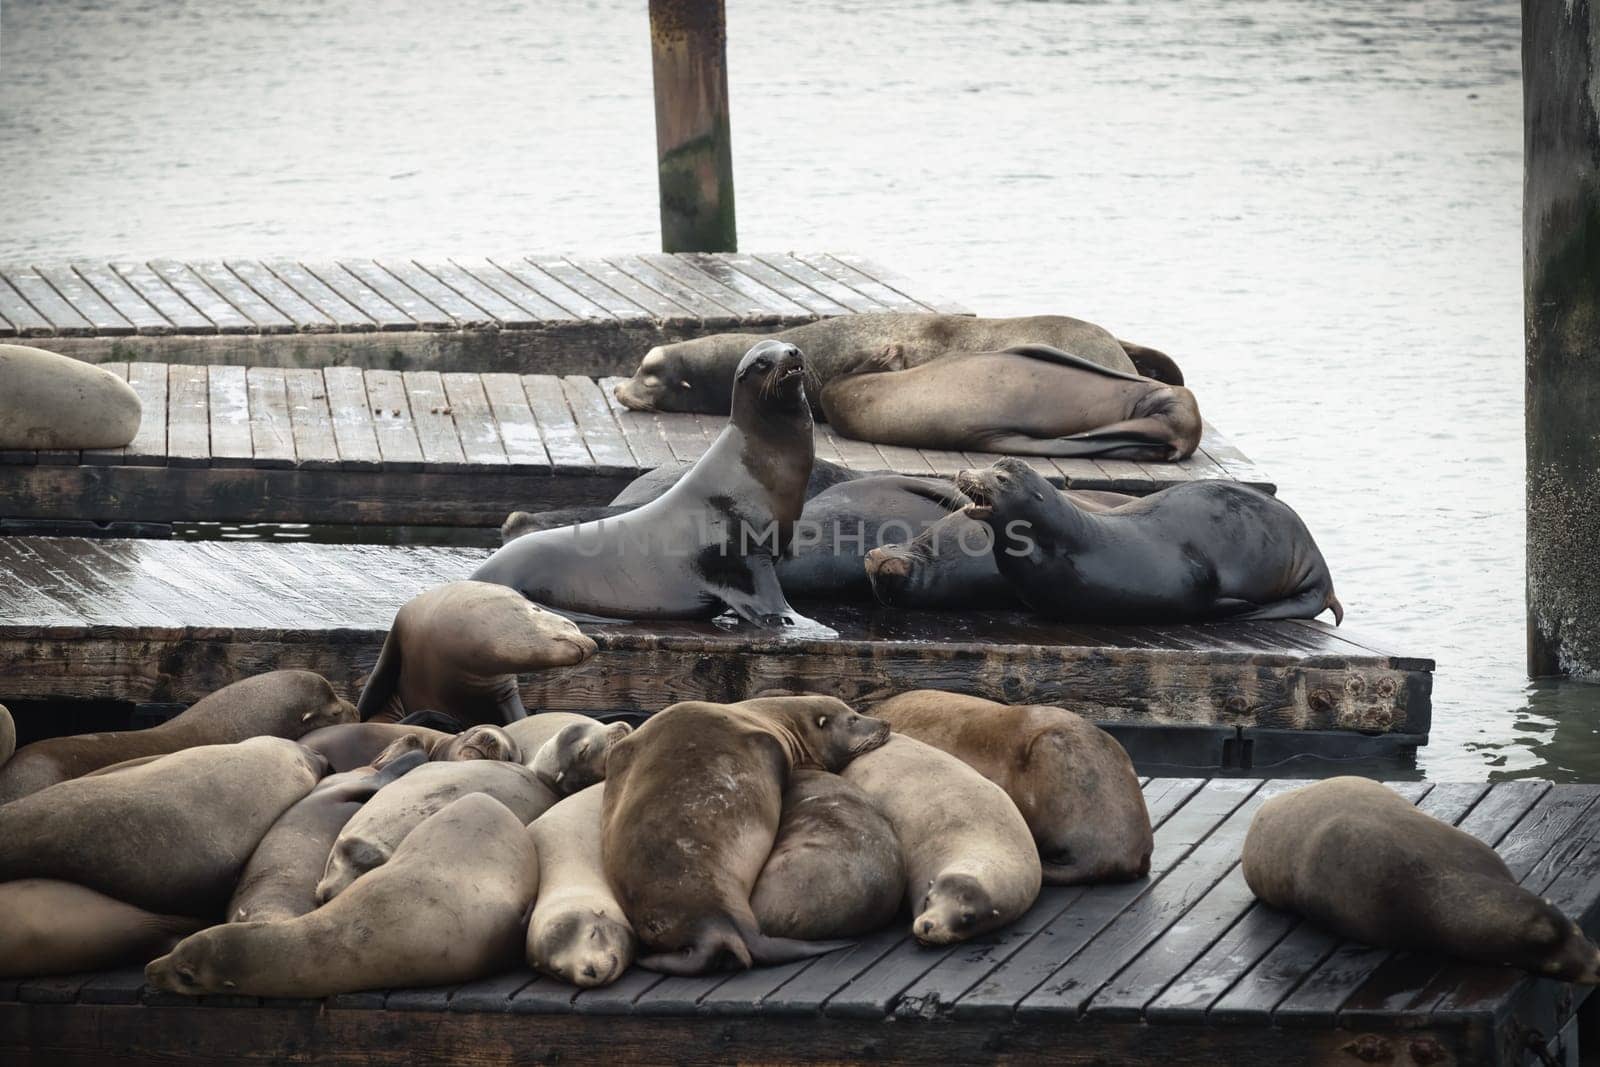 Marine Melee: Two Sea Lions in Heated Dispute on San Francisco Pier by OliveiraTP